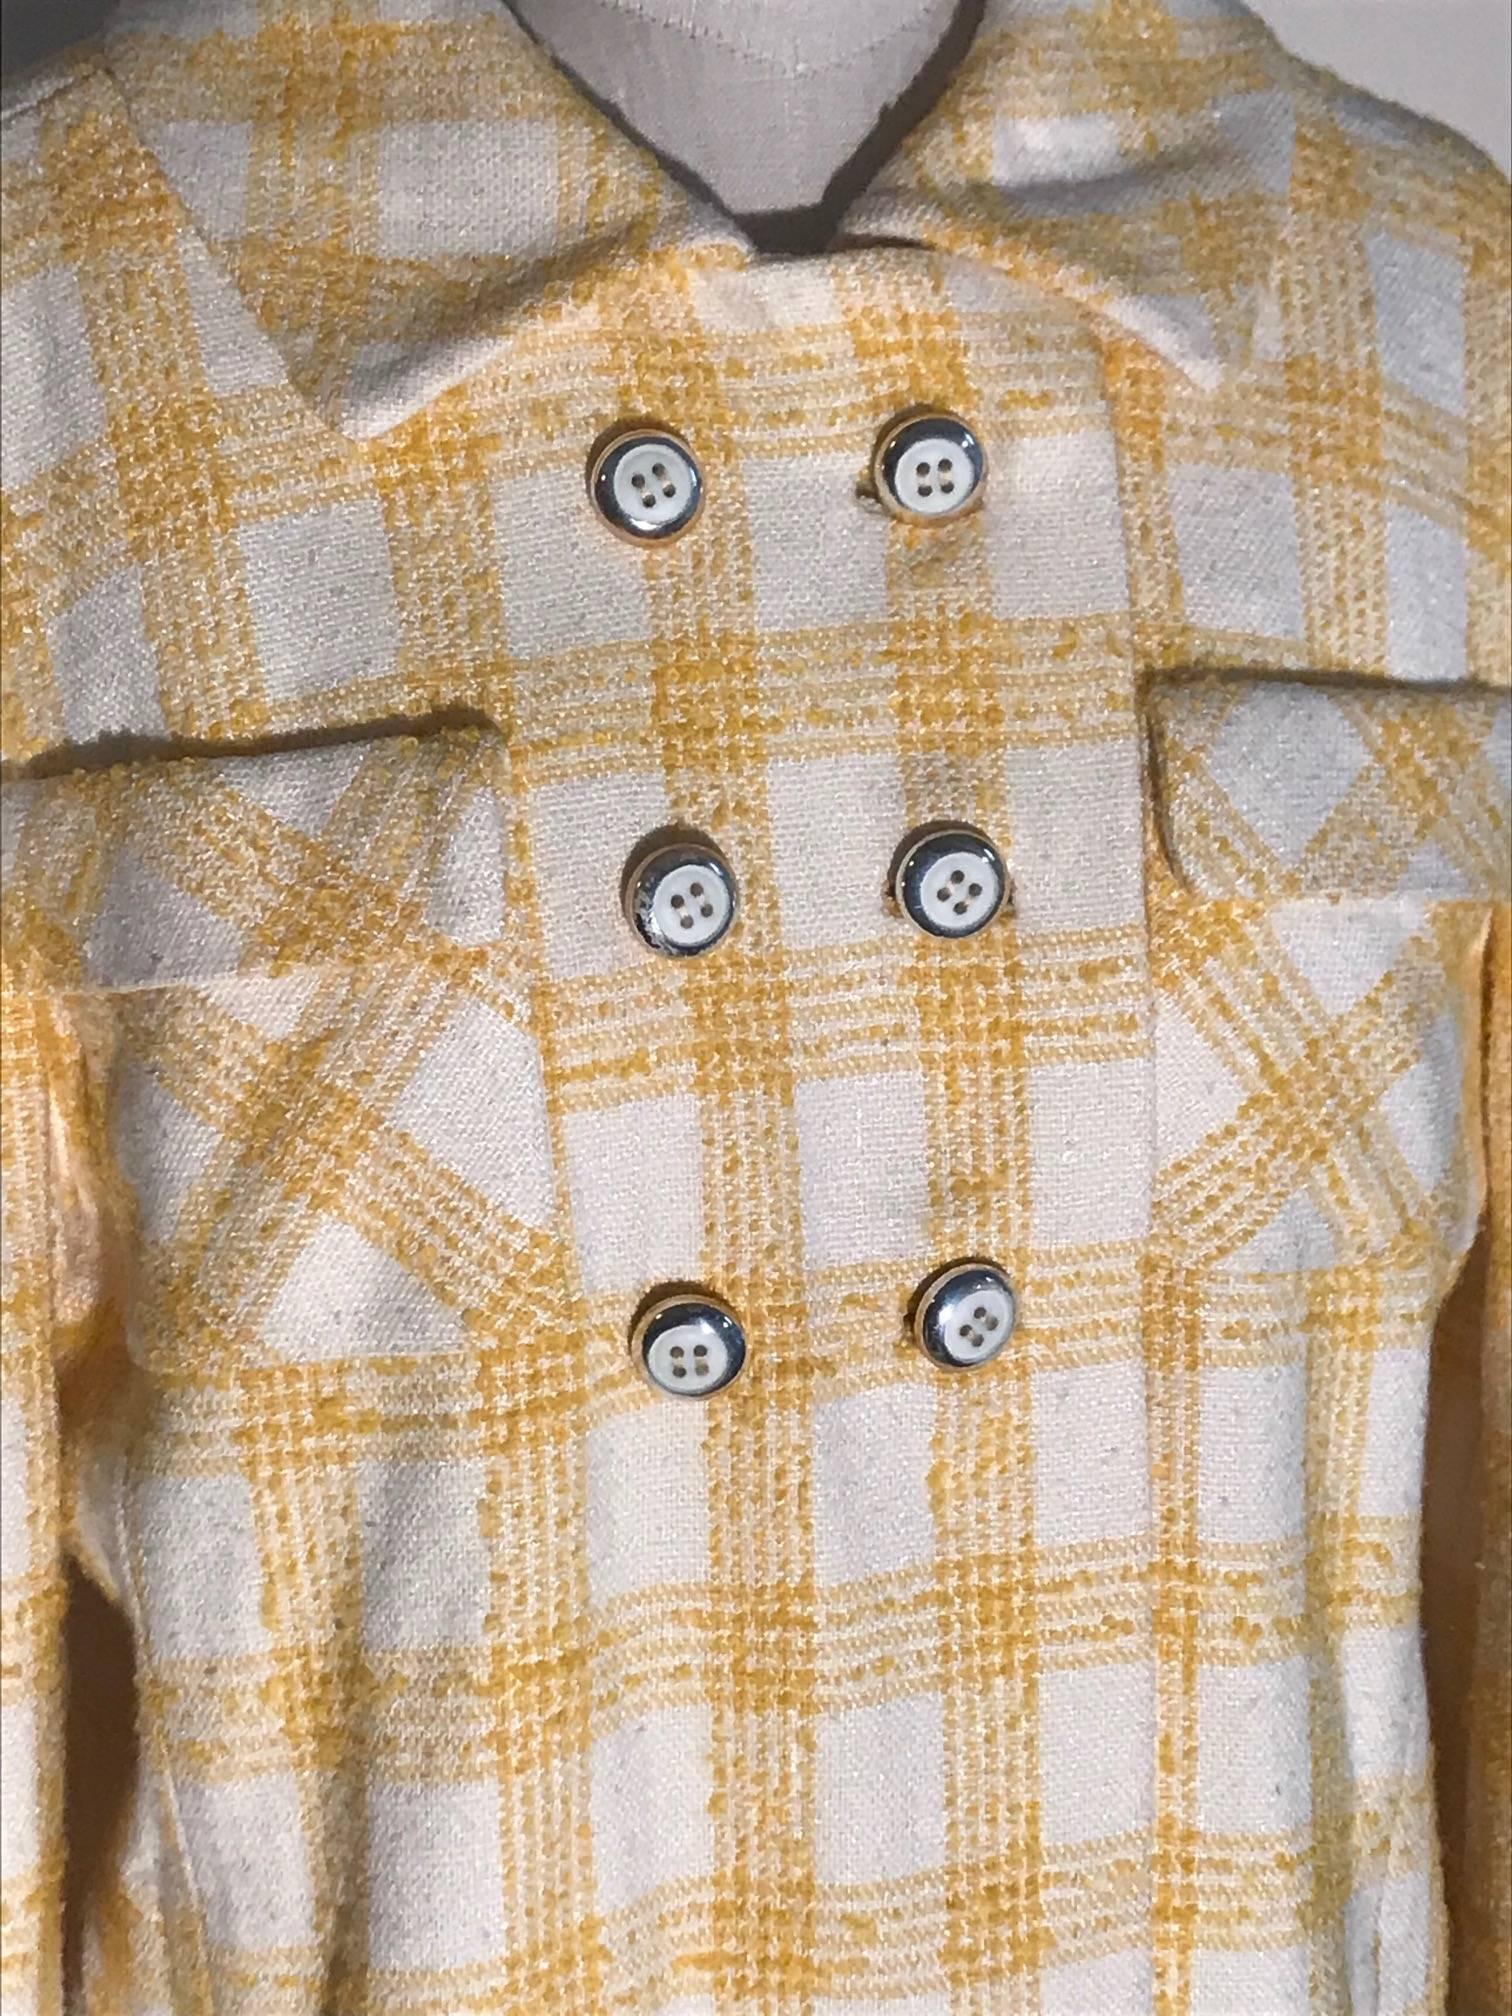 Vintage 1960s Riva for Miss Magnin by I Magnin yellow and white plaid coat. Patch pockets and six white buttons at front with silver trim.  (Three decorative, three working with extra interior snaps to fasten.) Pockets hidden in seams at front